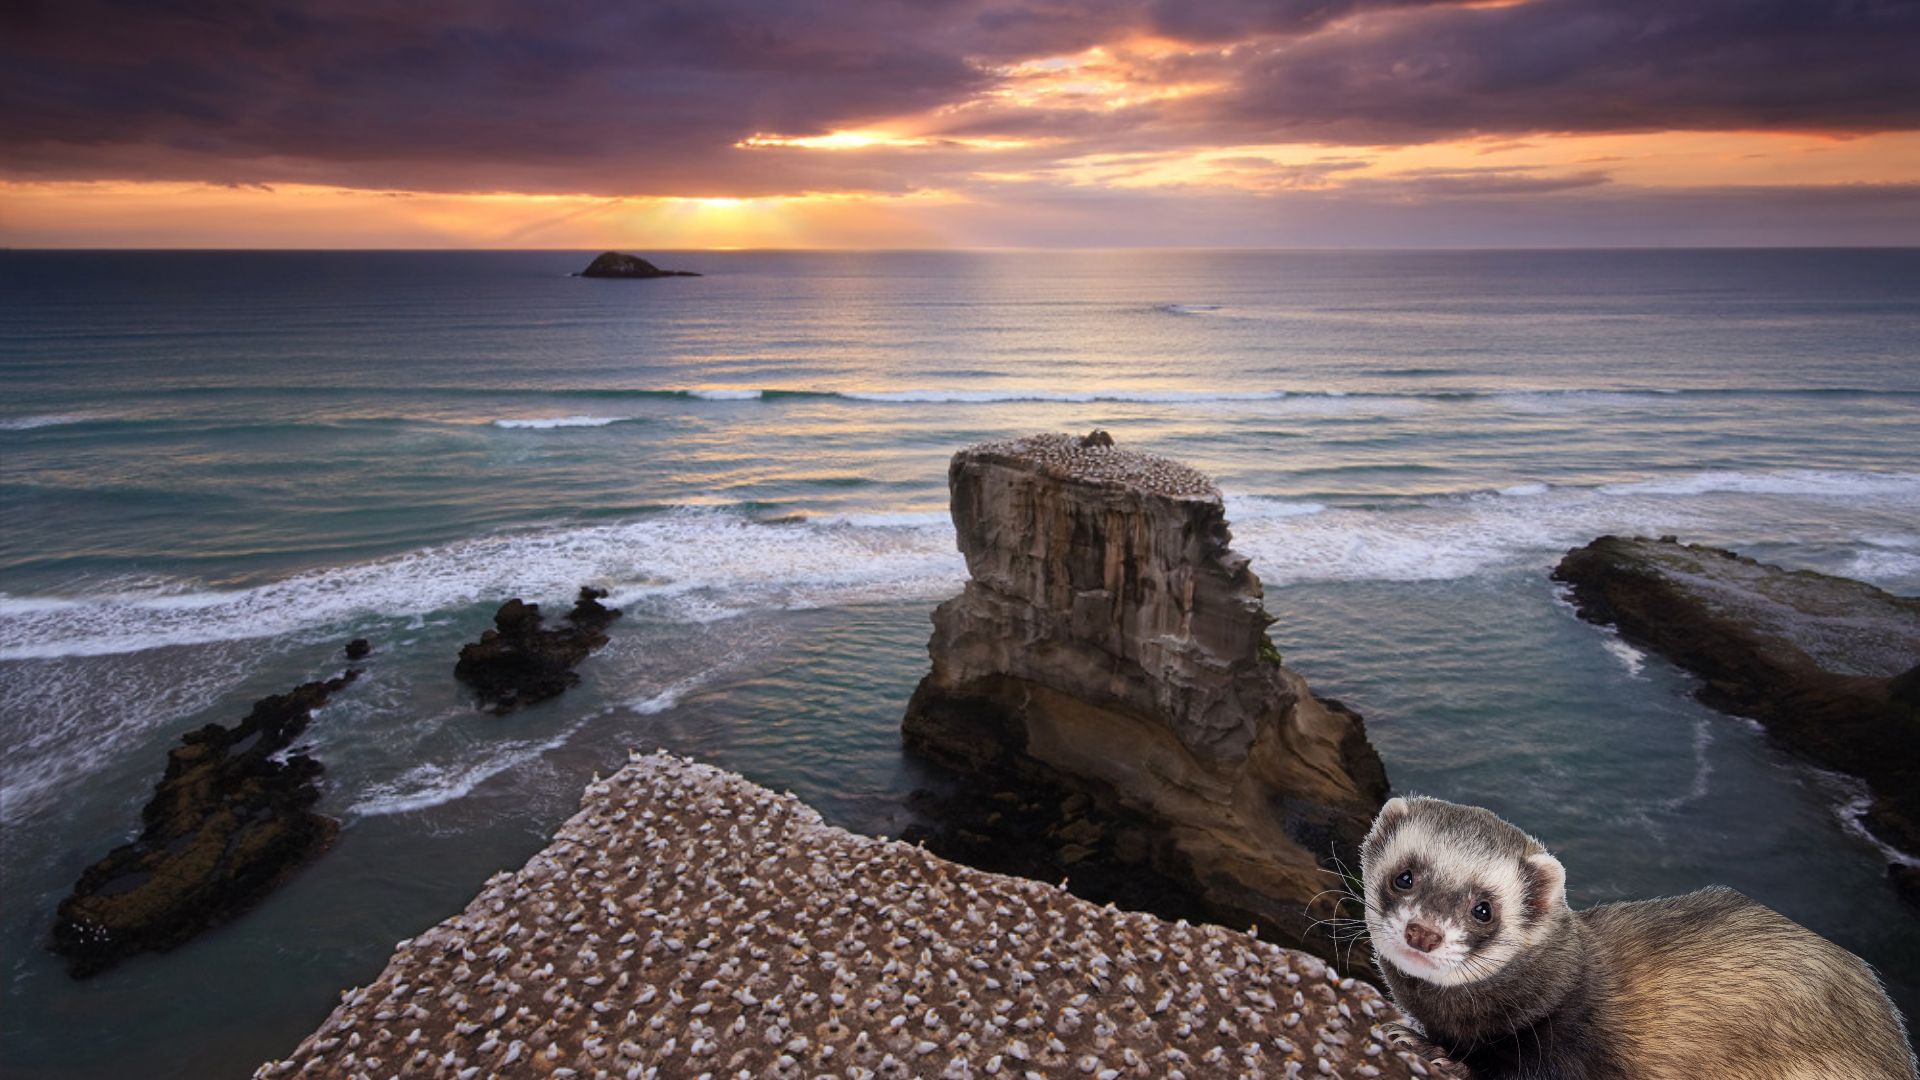 A ferret superimposed on a photo of a gannet colony on cliffs overlooking the ocean